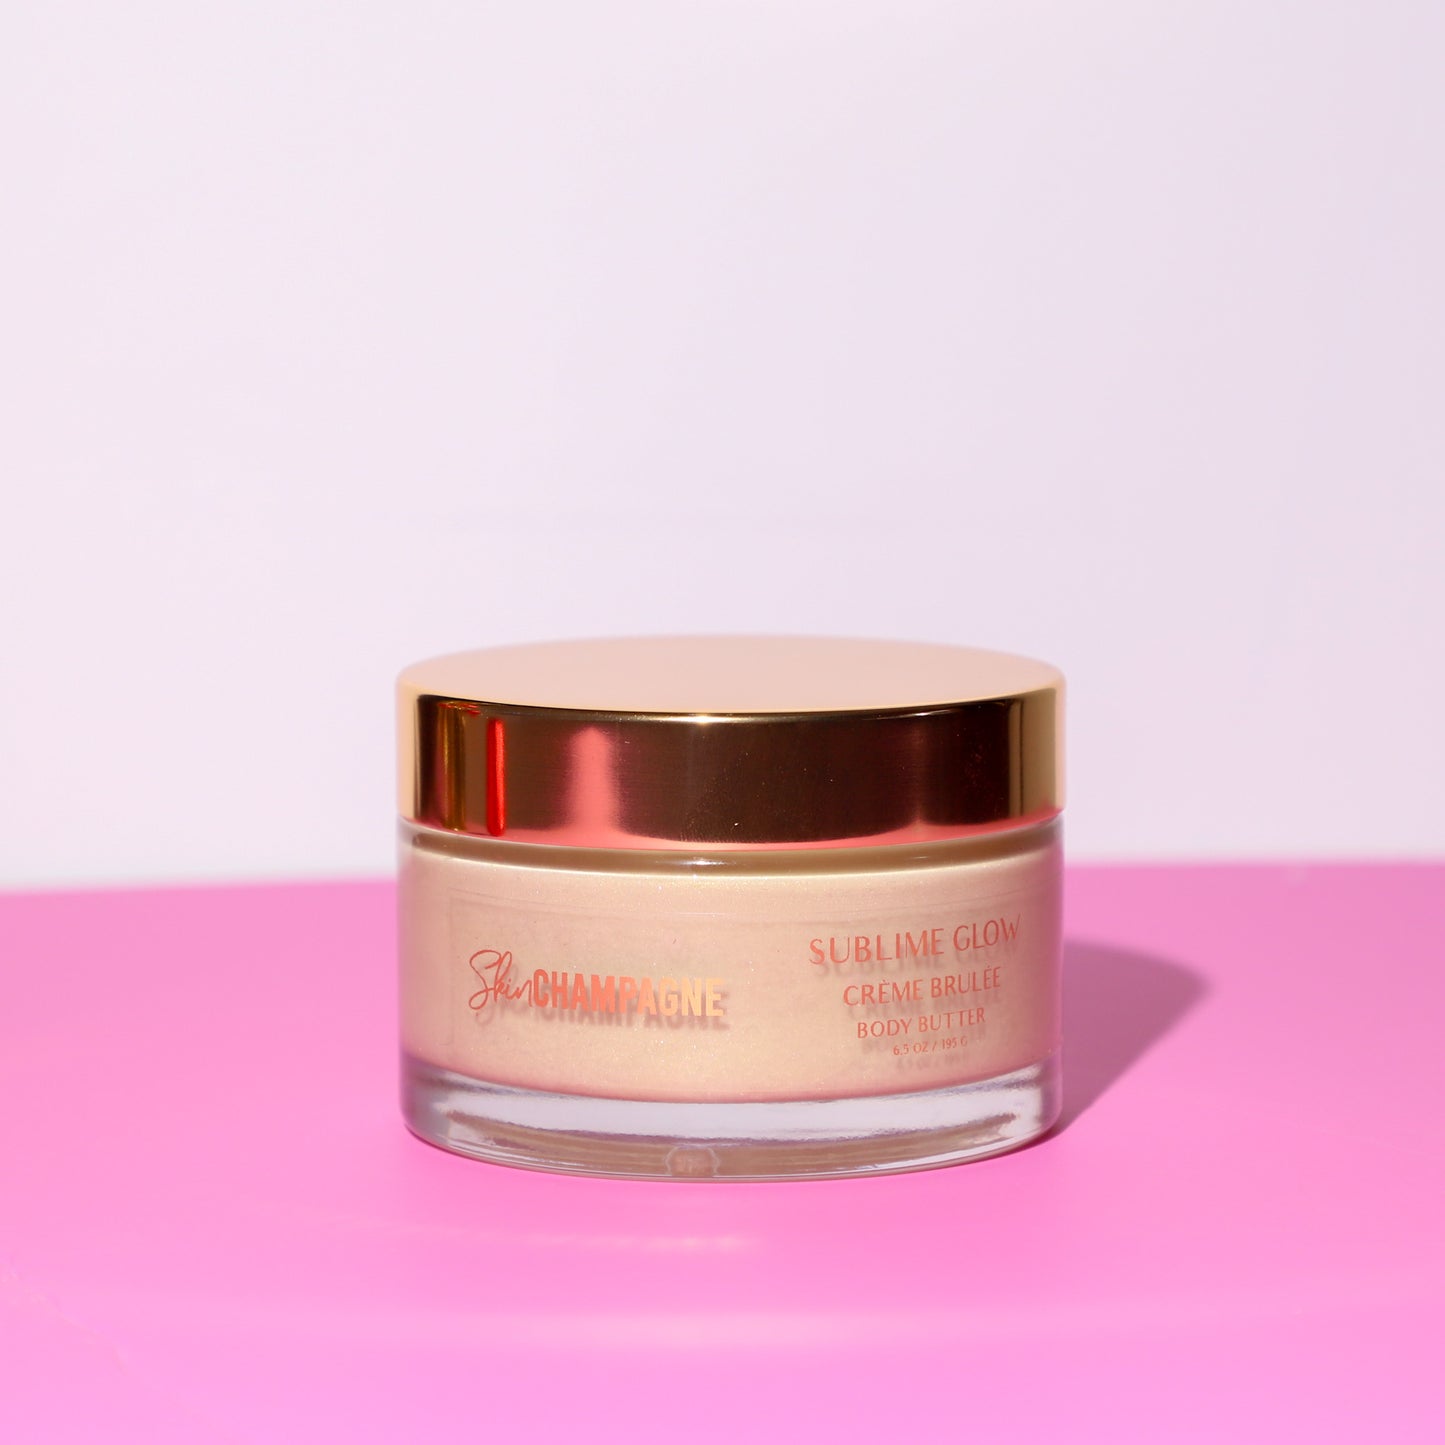 SUBLIME GLOW Body Butter